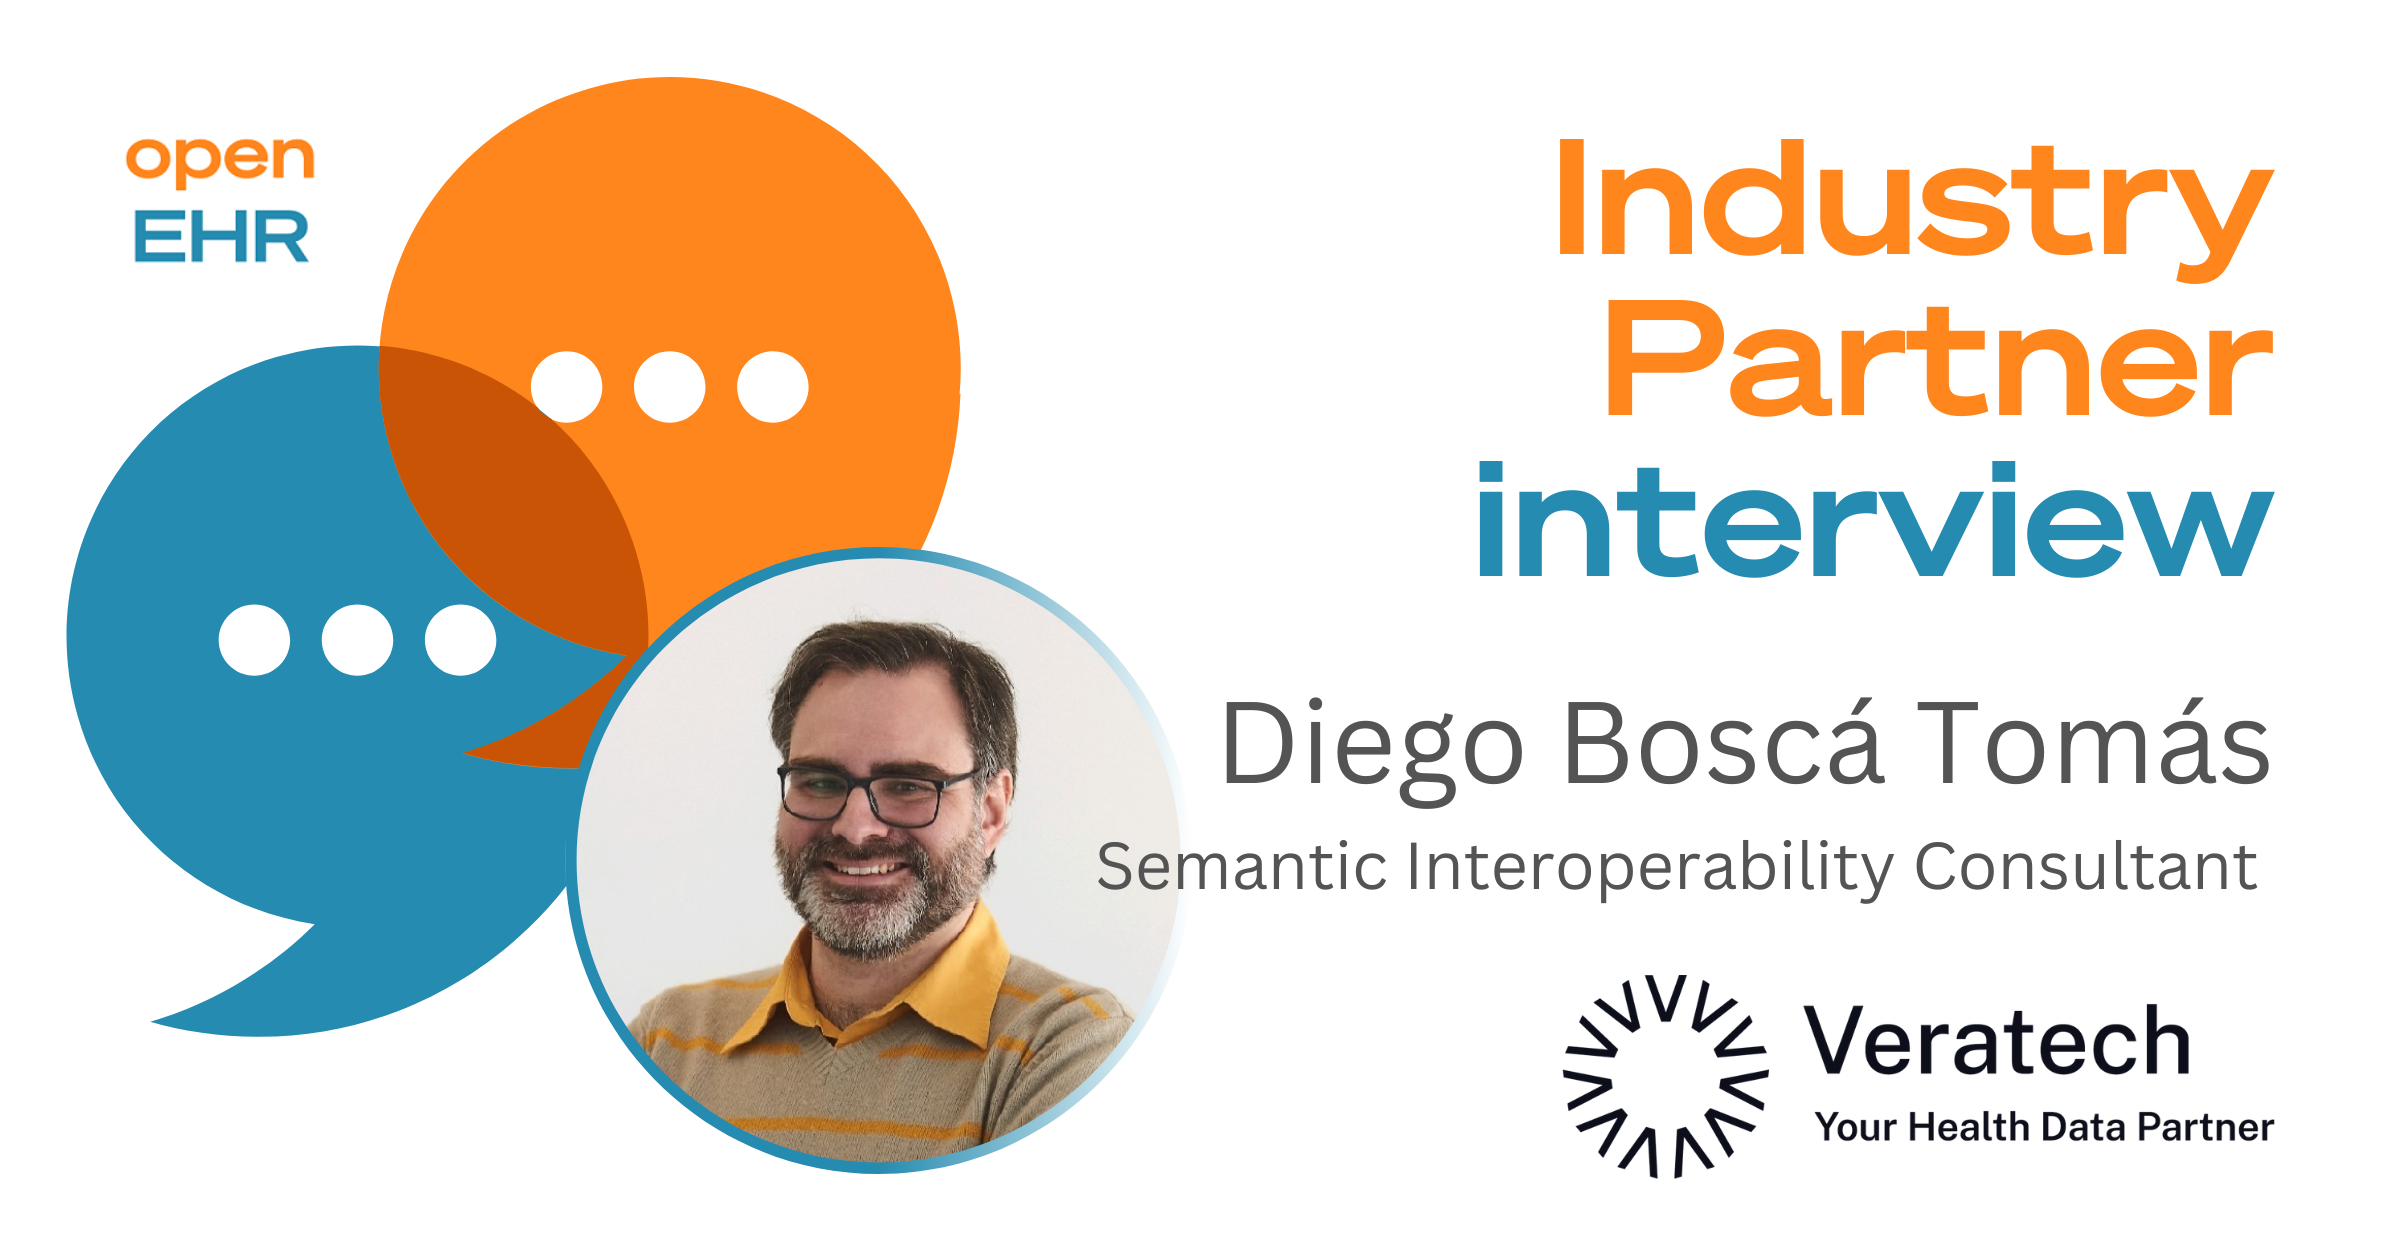 Diego Boscá Tomás, Semantic Interoperability Consultant talks to us about InfoBanco, the intersection between openEHR and OMOP, and what the future holds for Veratech...